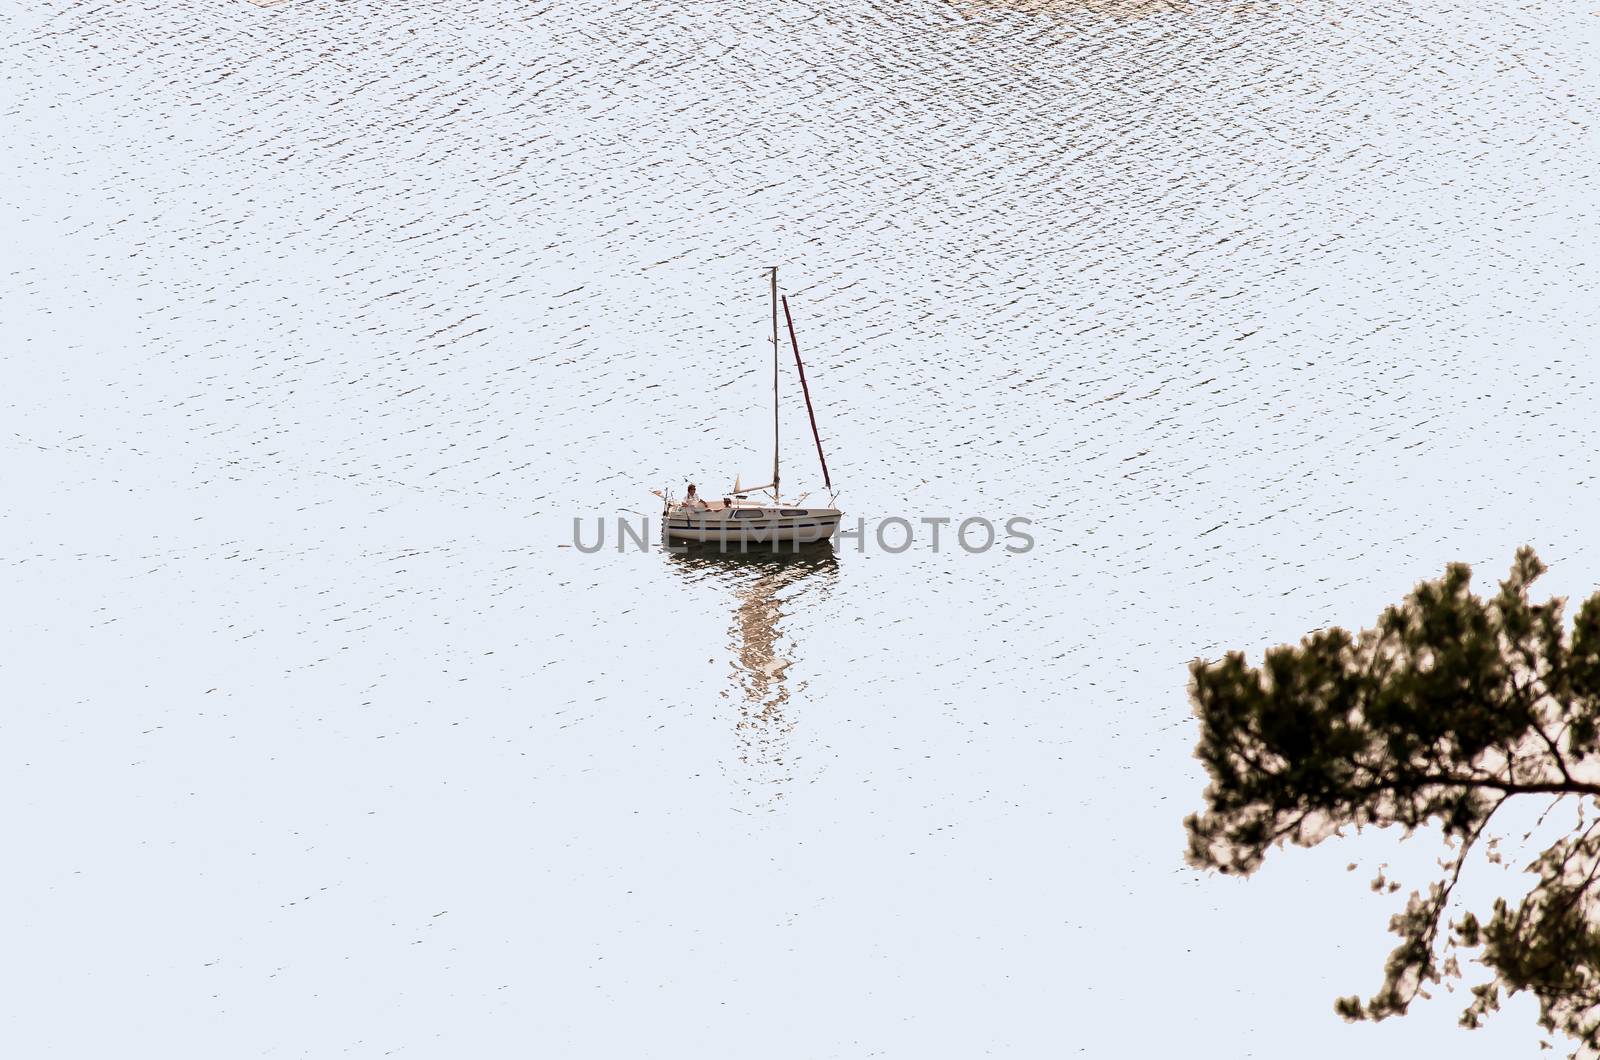 Small sailboat by JFsPic